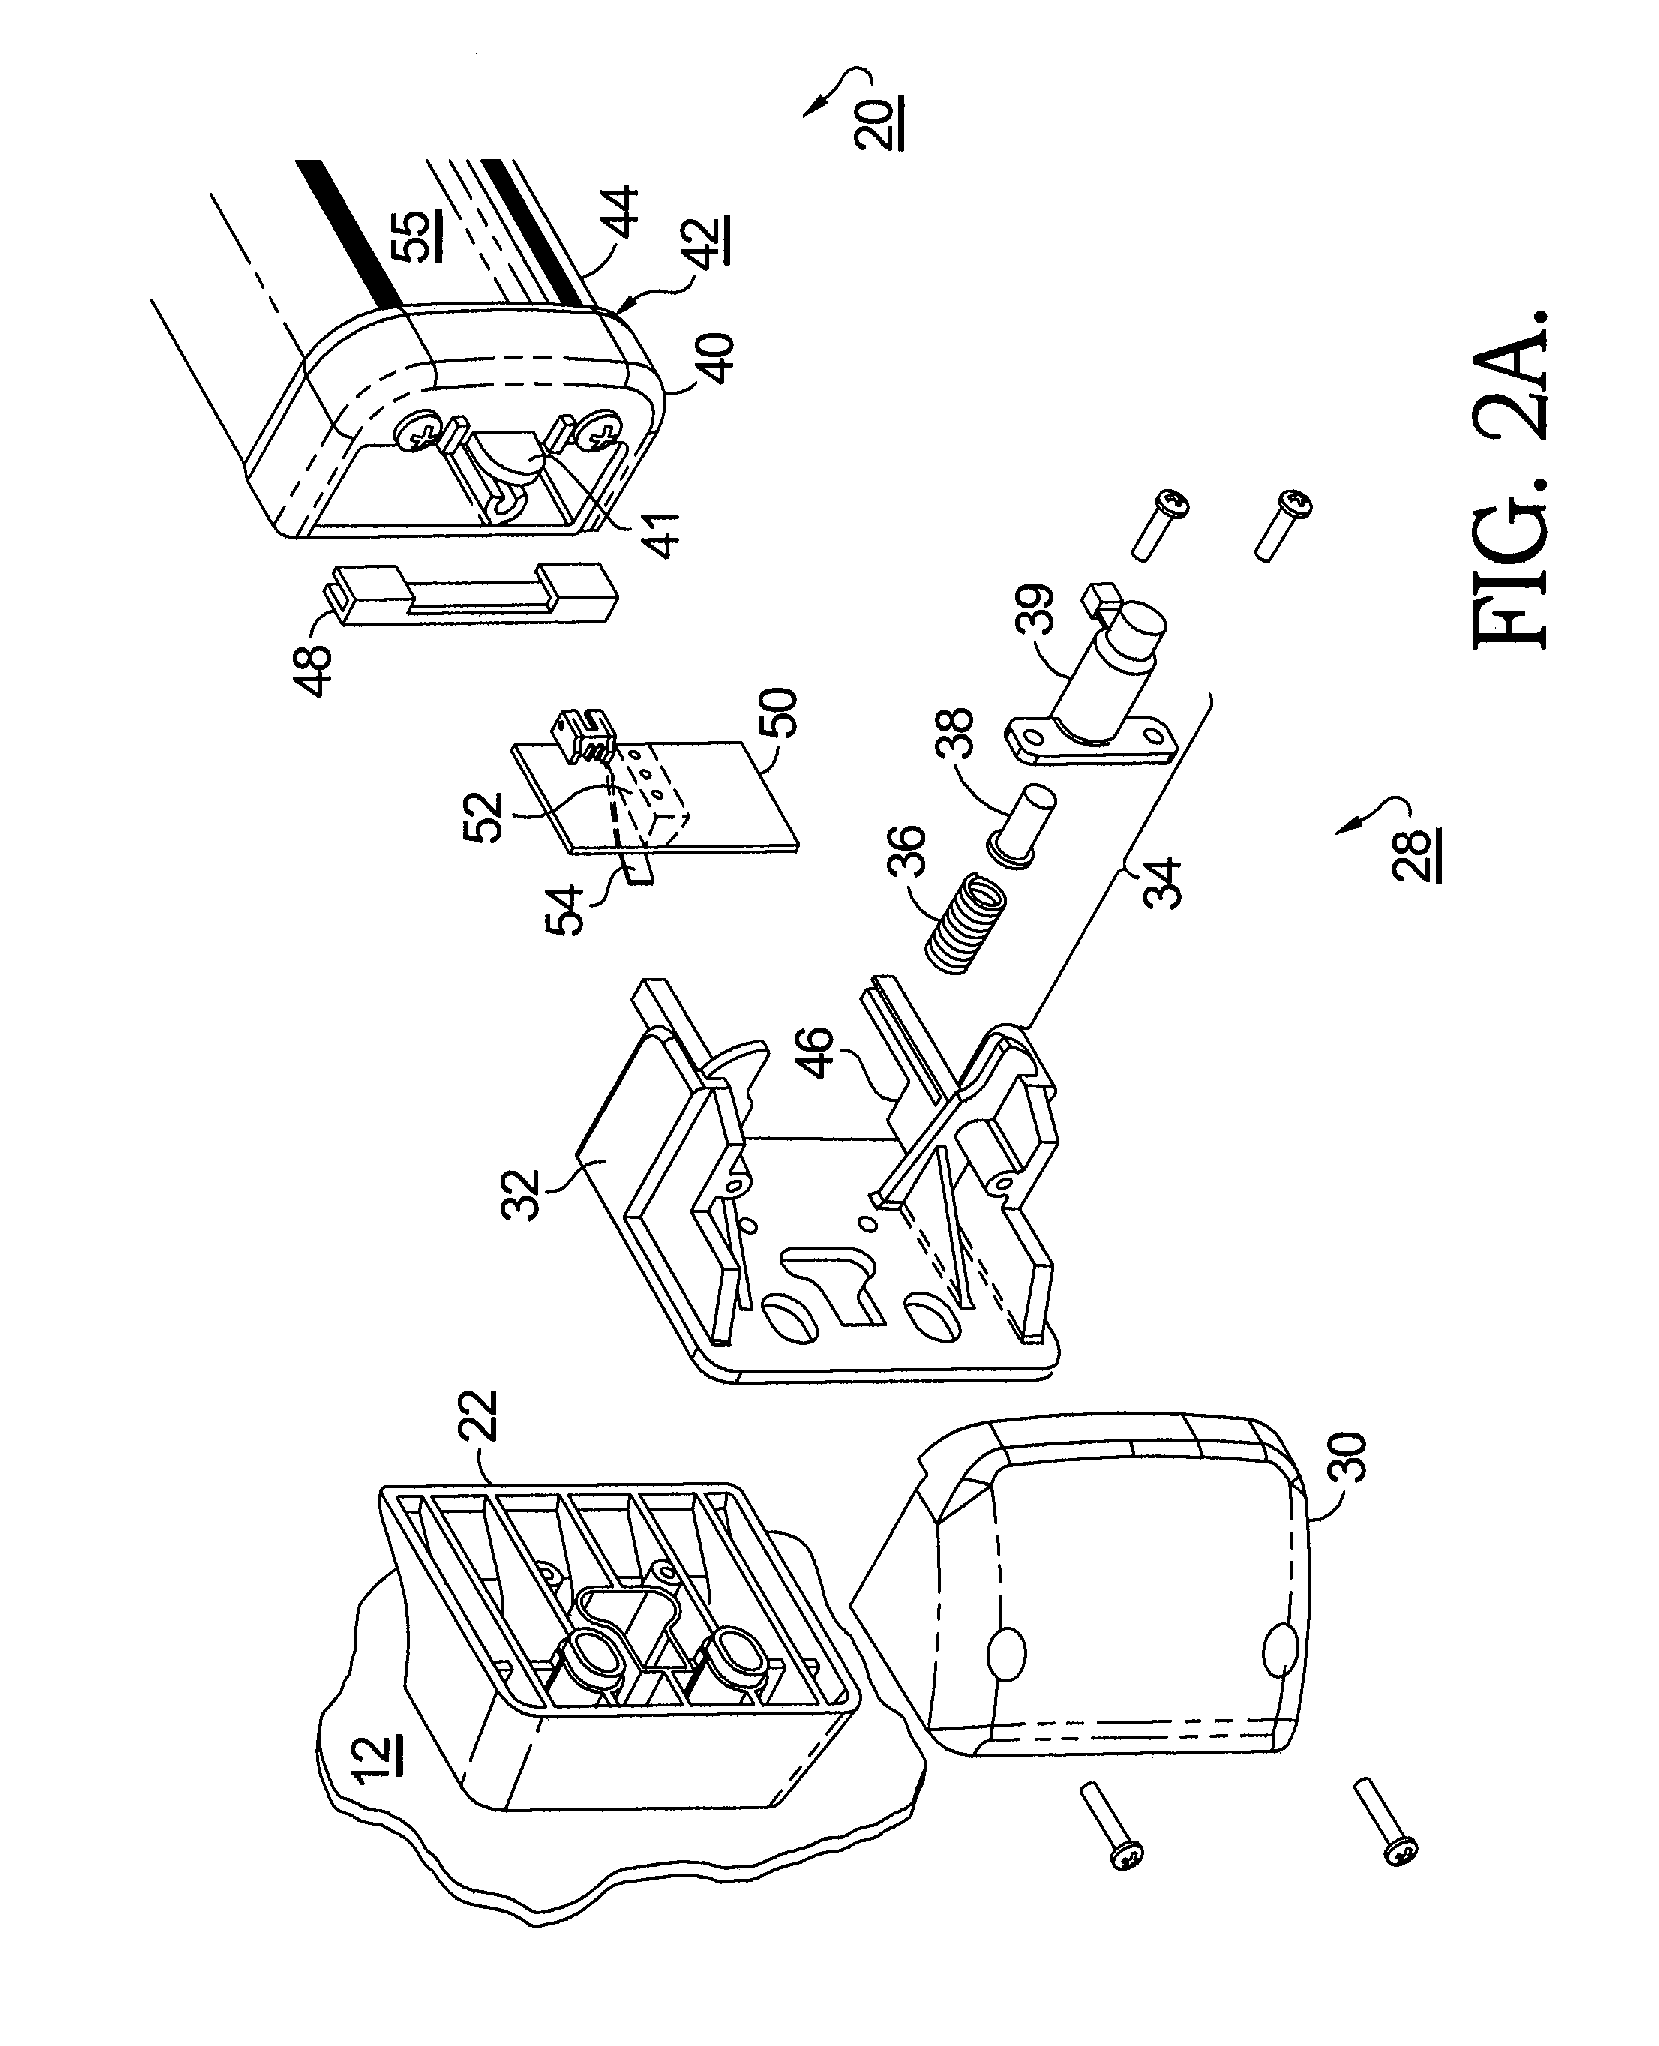 Access Control Device for a Door